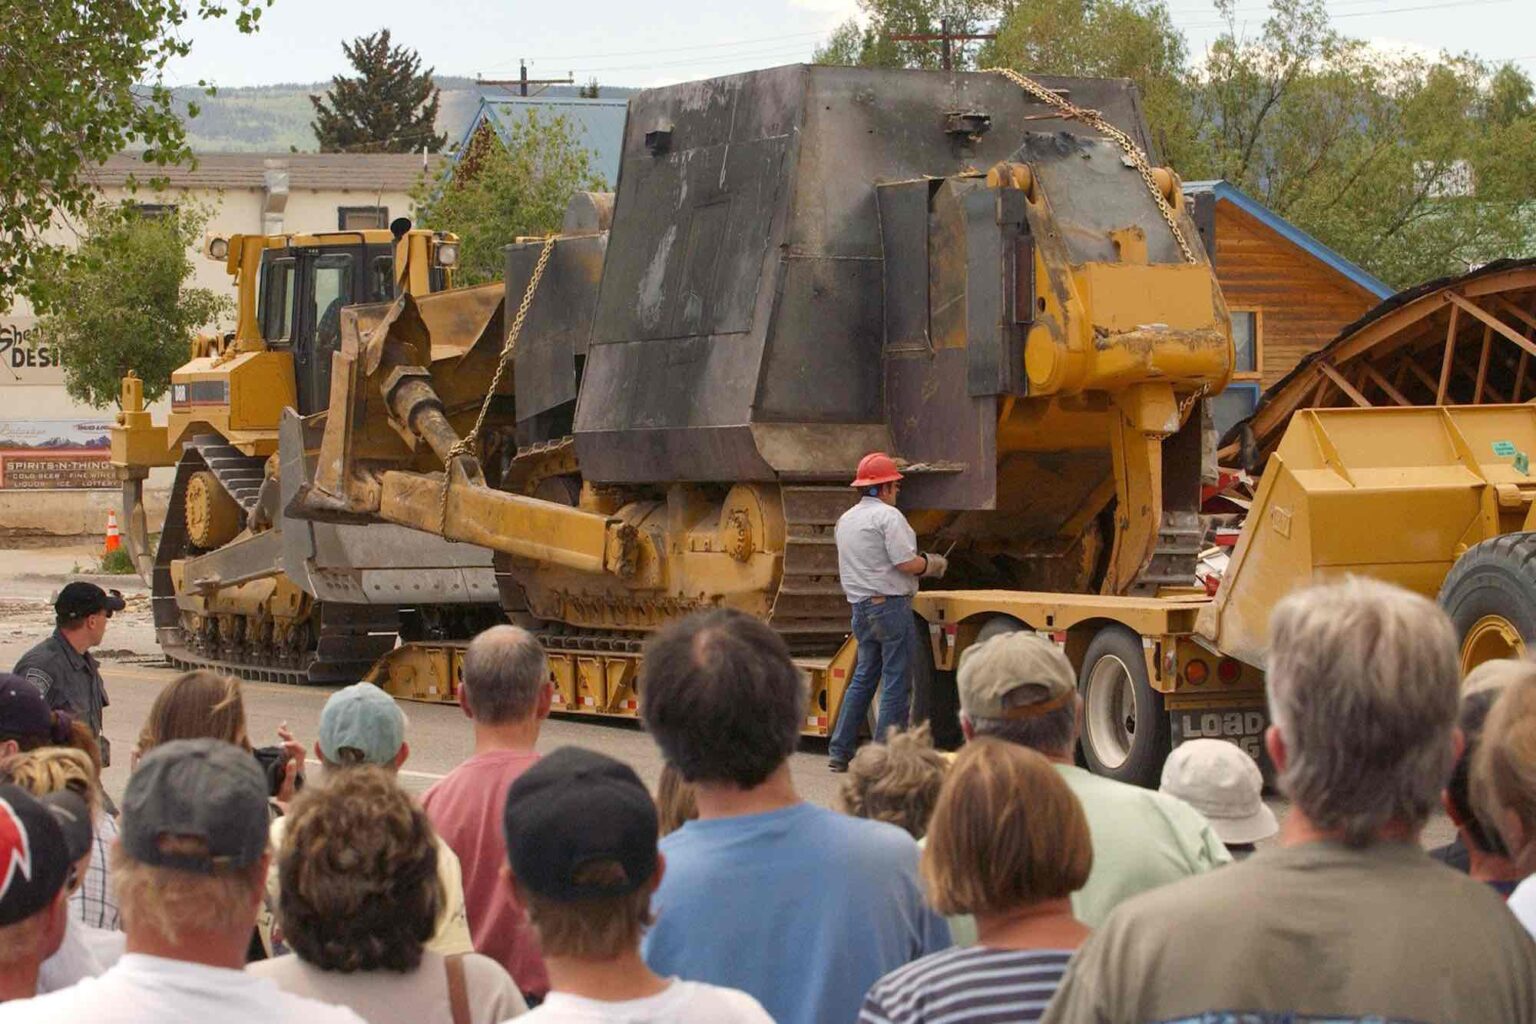 Who is Marvin Heemeyer and why did he modify a bulldozer into a tank to destroy a Colorado town? Learn the surprising details about the Killdozer.